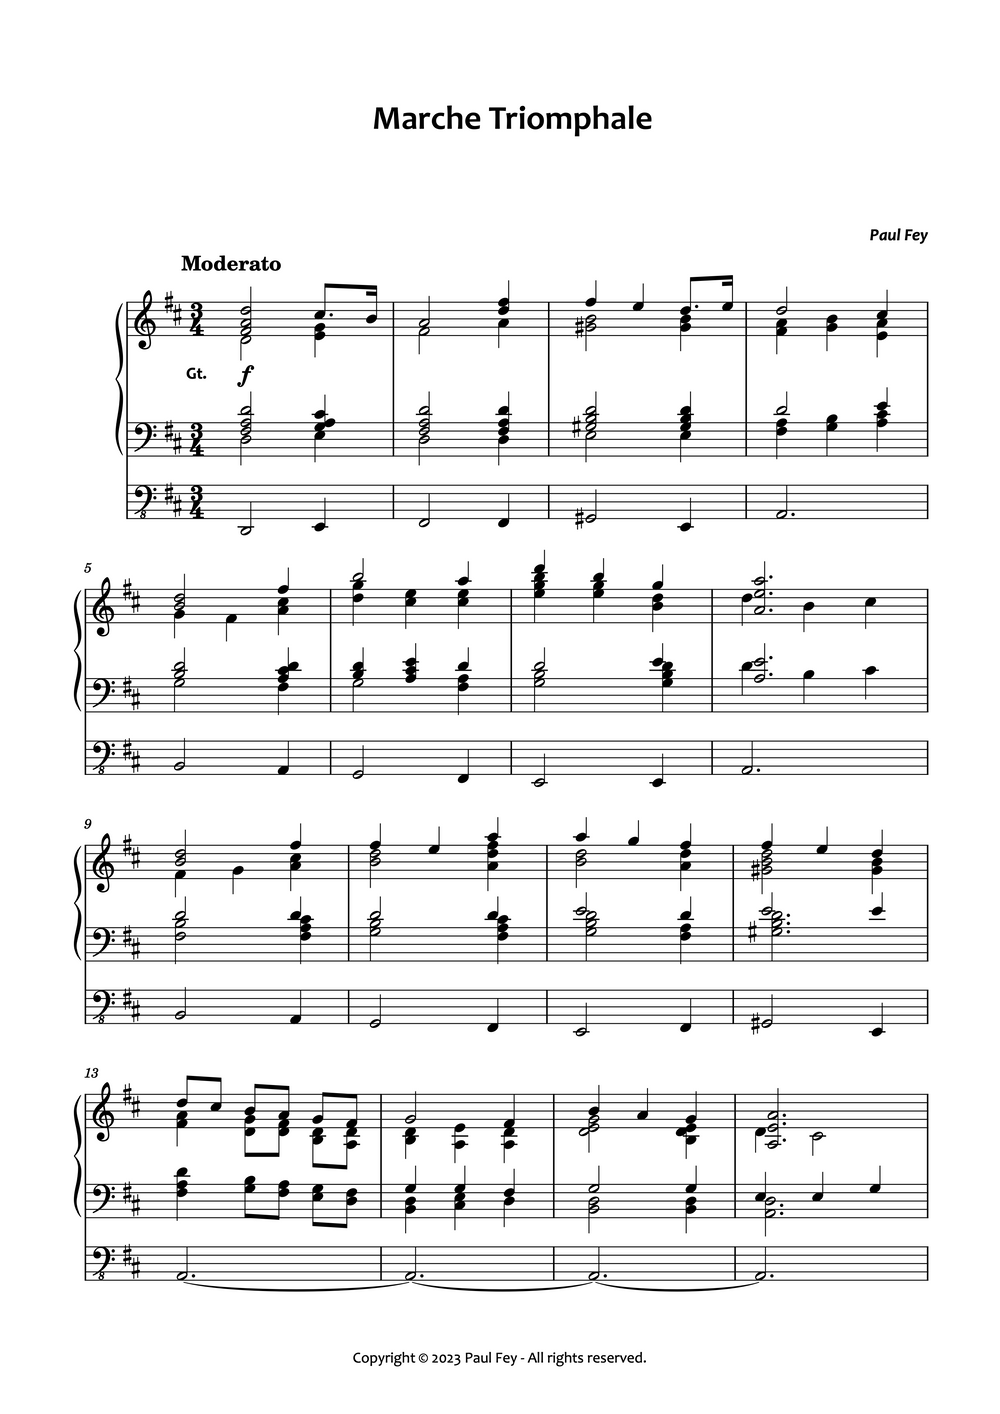 Marche Triomphale sheet music for Pipe Organ by Paul Fey